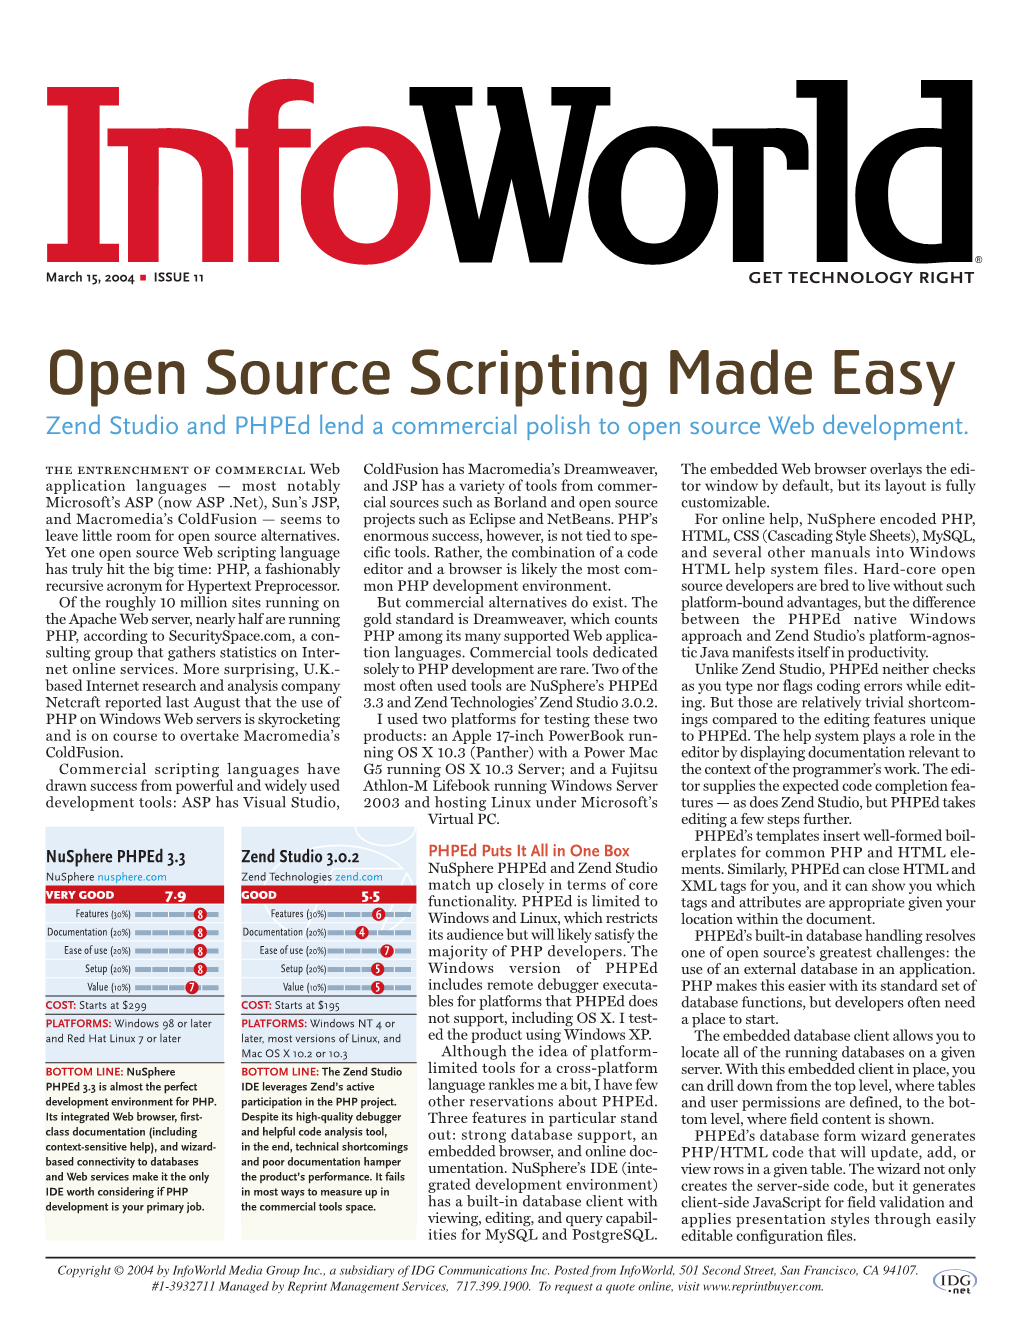 Open Source Scripting Made Easy Zend Studio and Phped Lend a Commercial Polish to Open Source Web Development